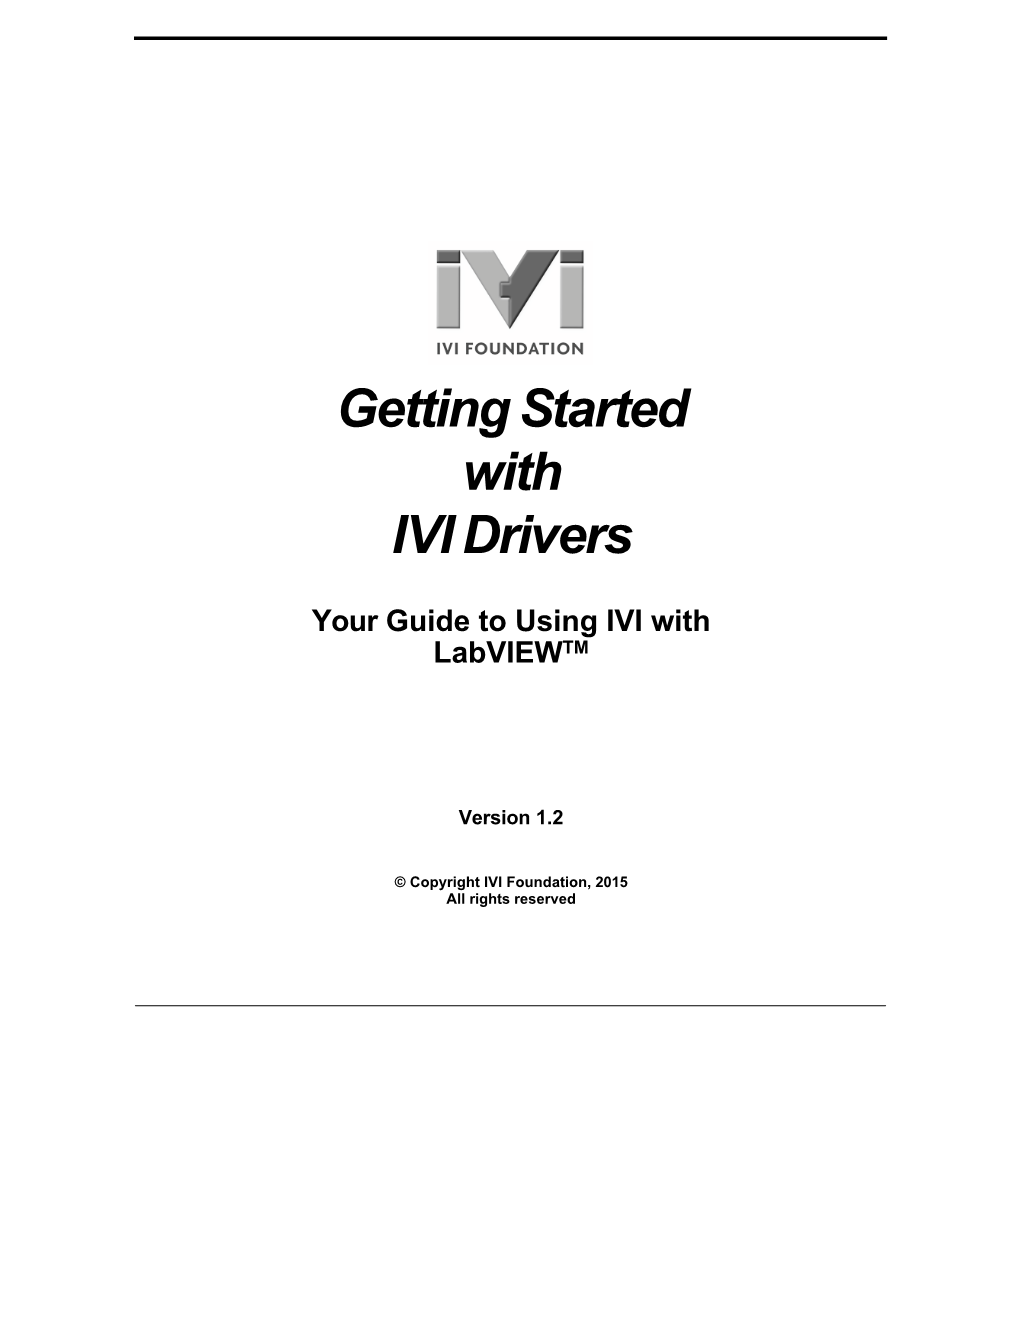 Using IVI with Labviewtm